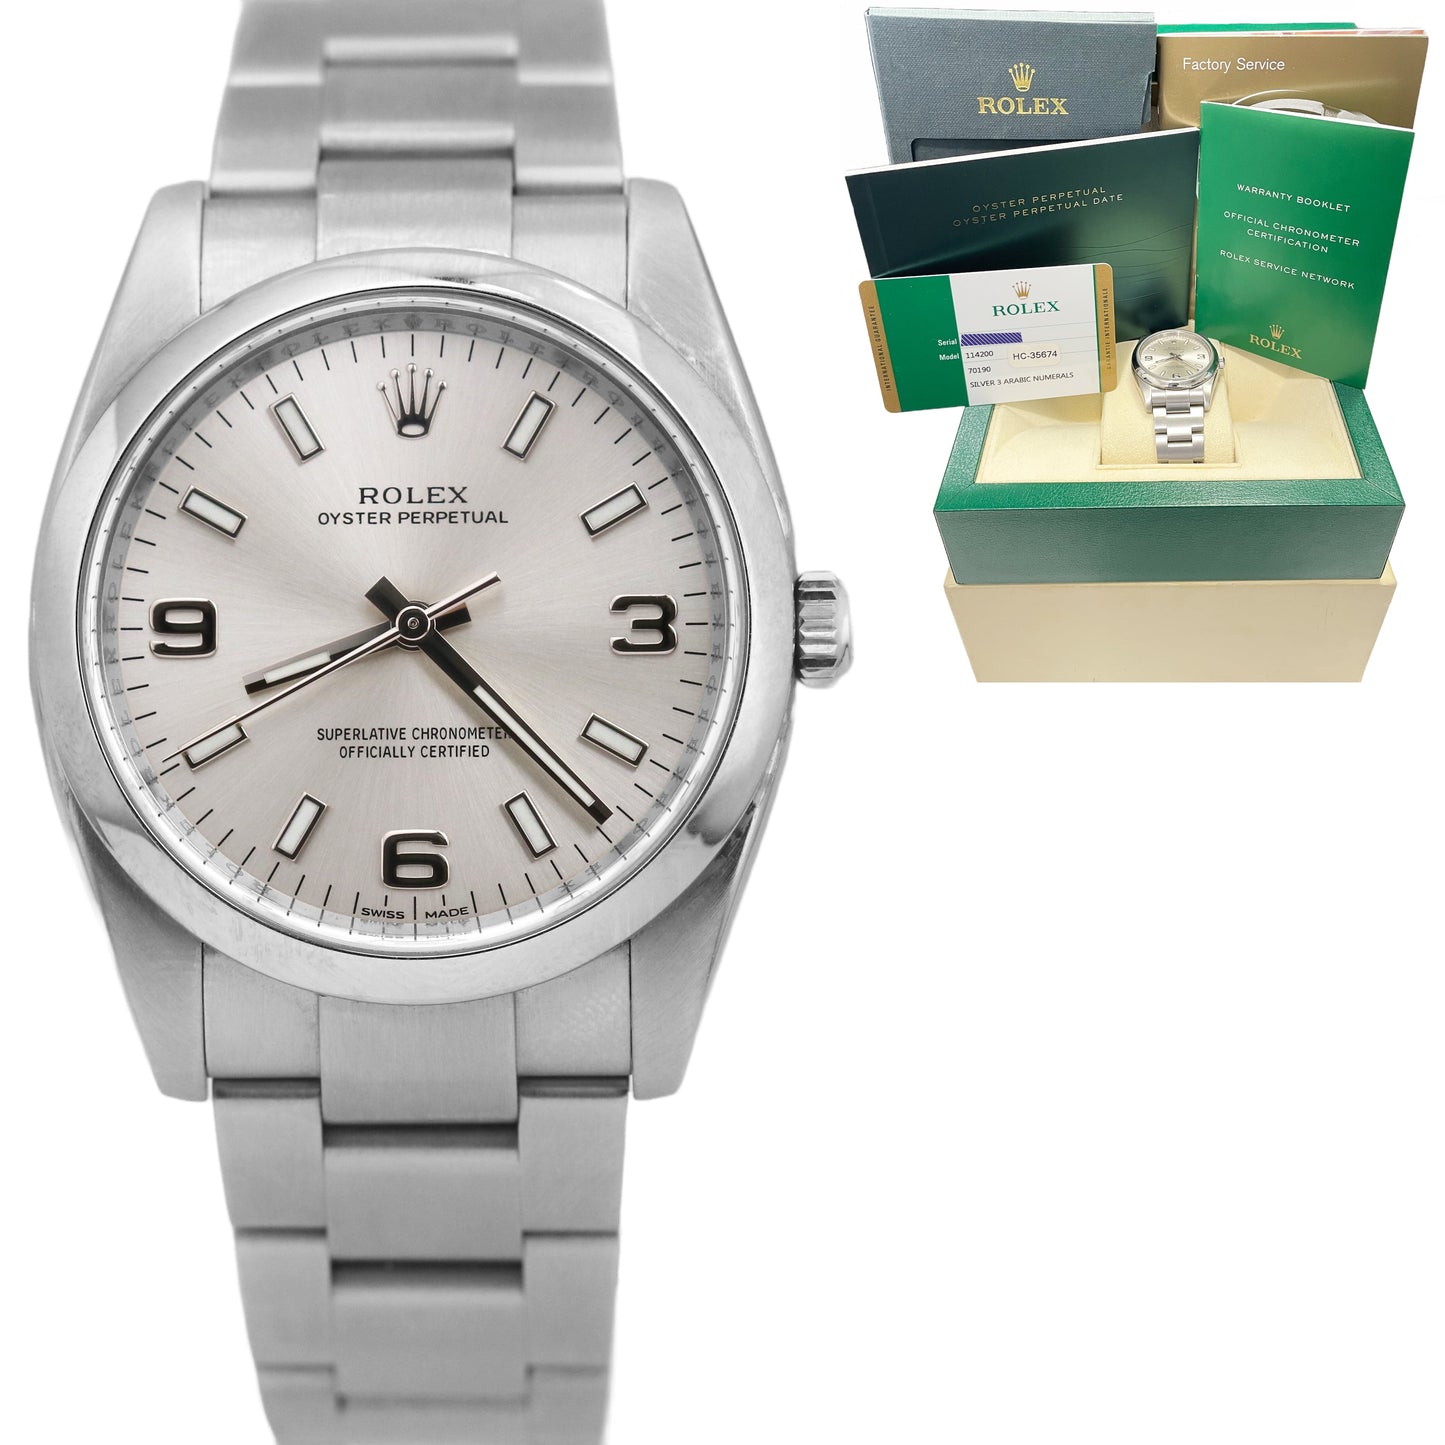 2015 Rolex Oyster Perpetual Silver 3-6-9 Dial Stainless Steel 34mm Watch 114200